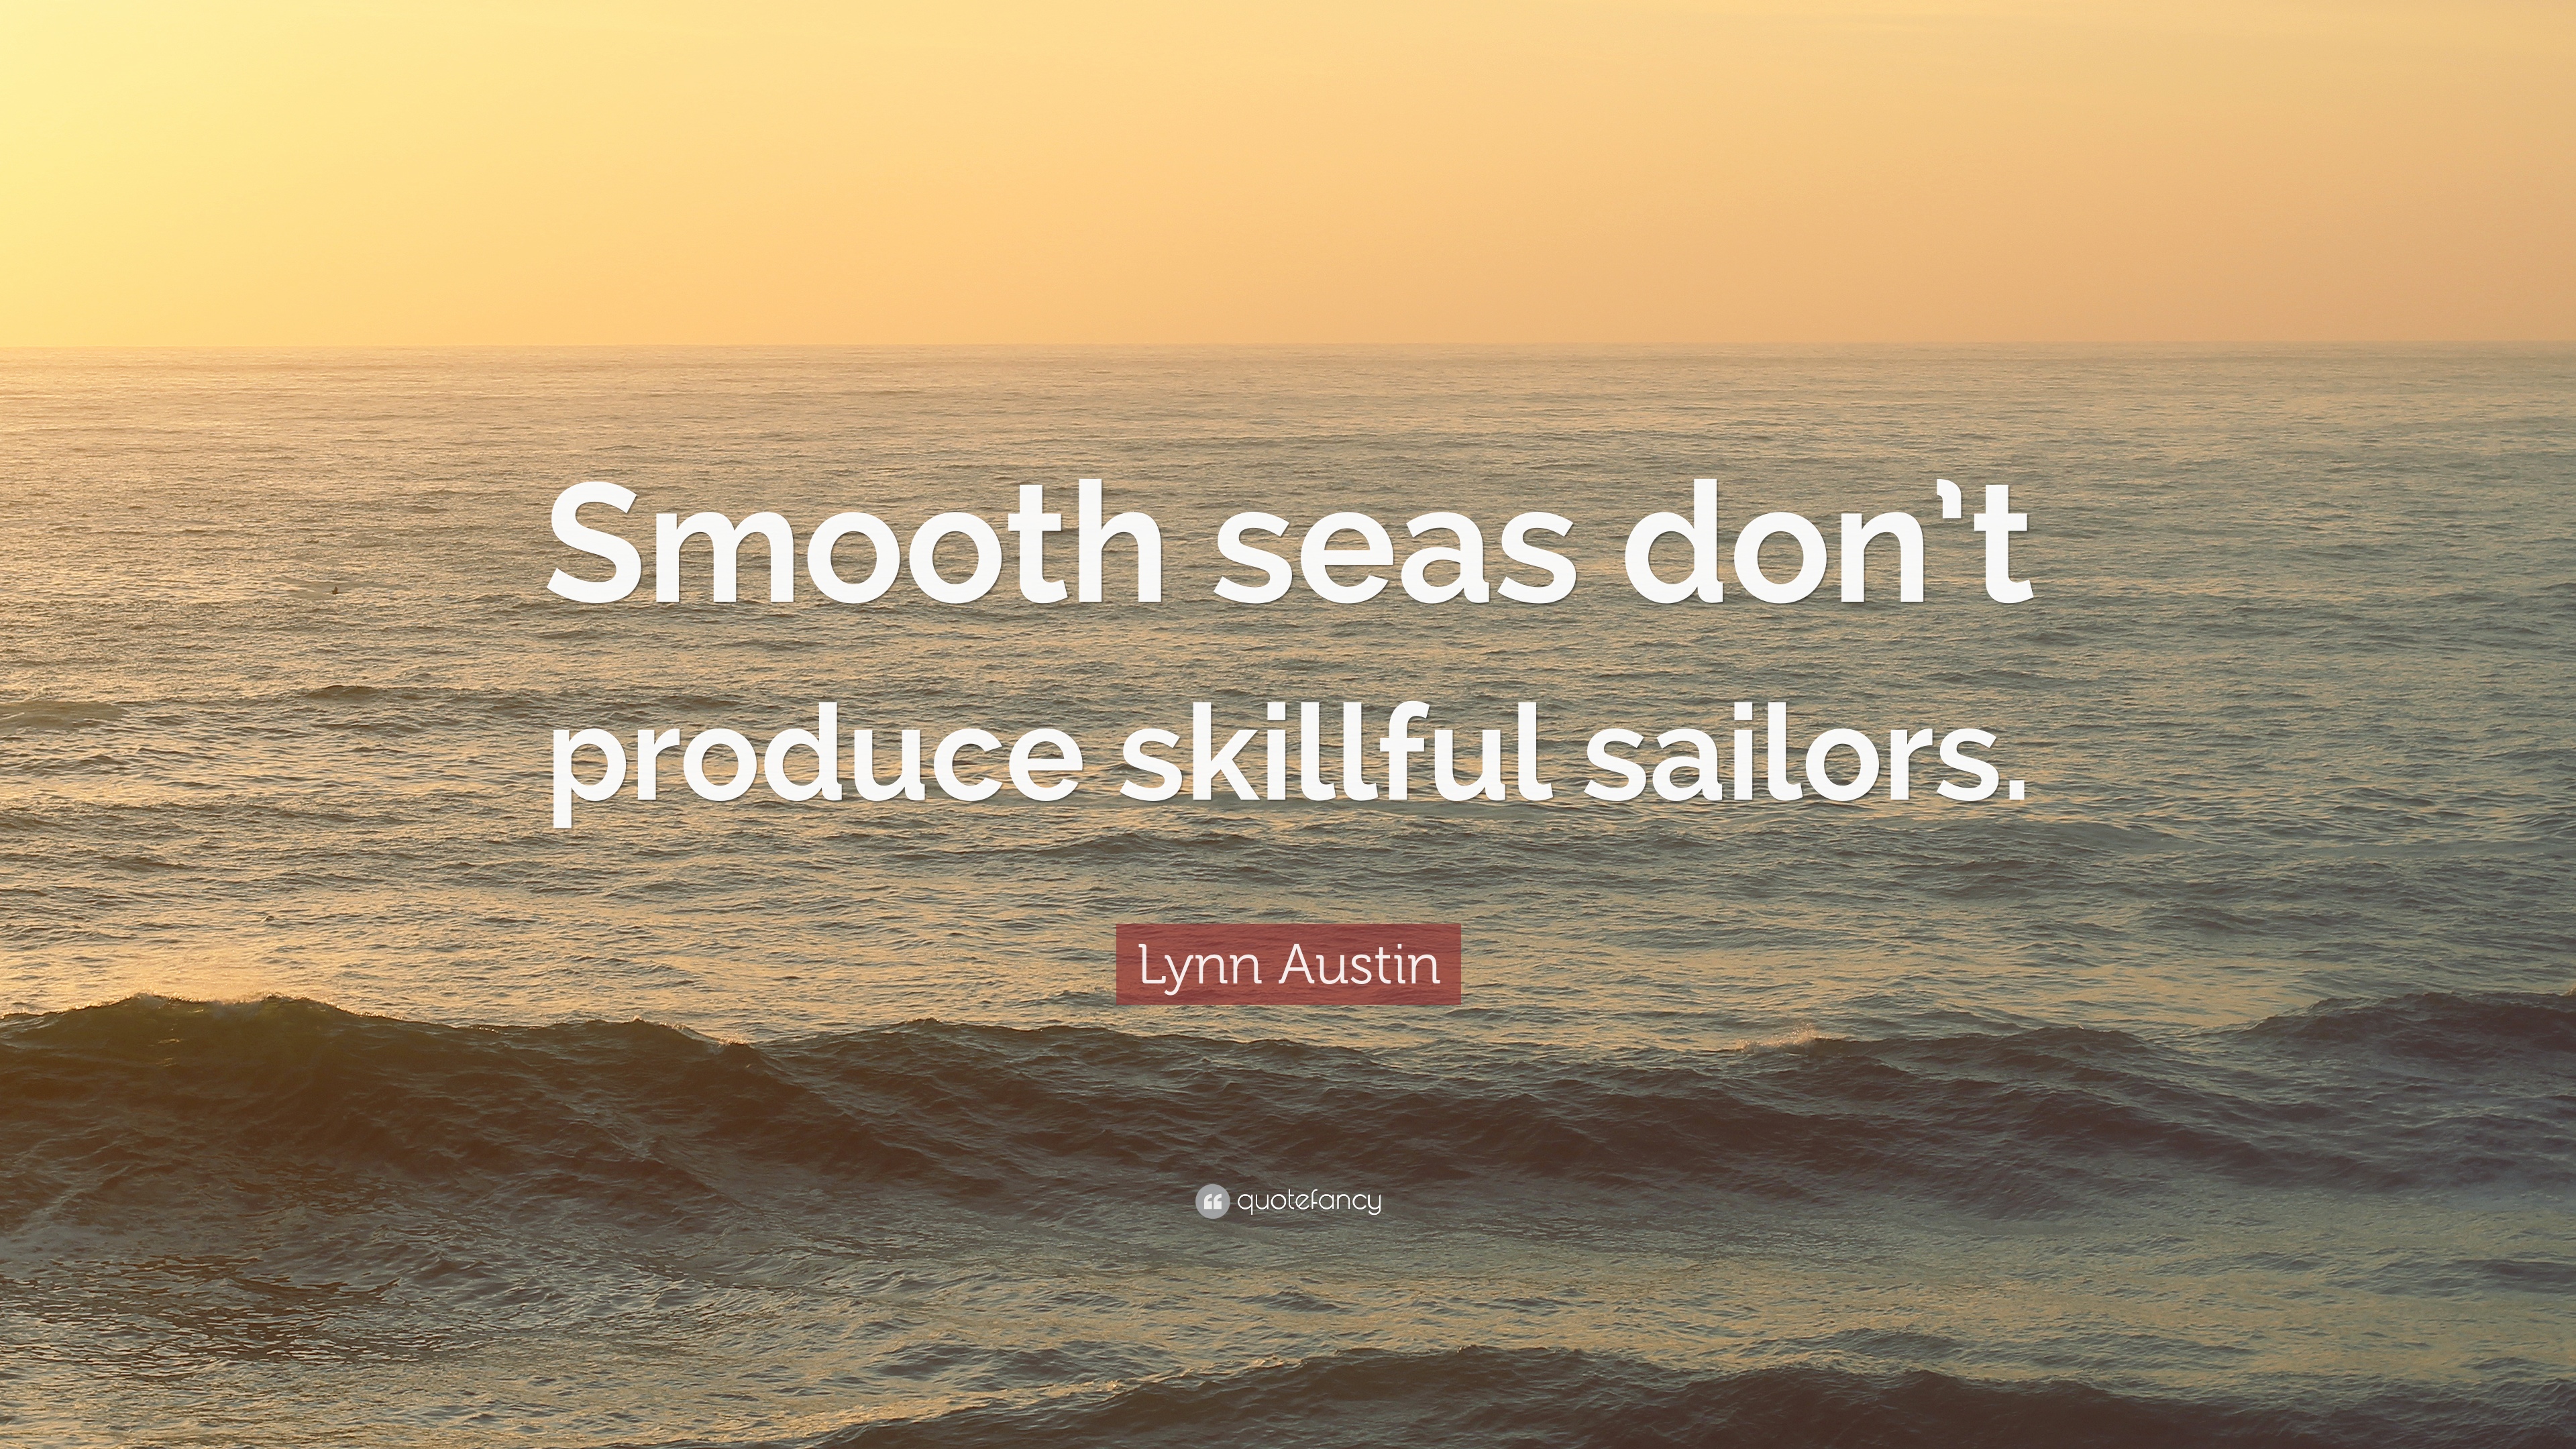 Lynn Austin Quote: “Smooth seas don't produce skillful sailors.” (12 ...